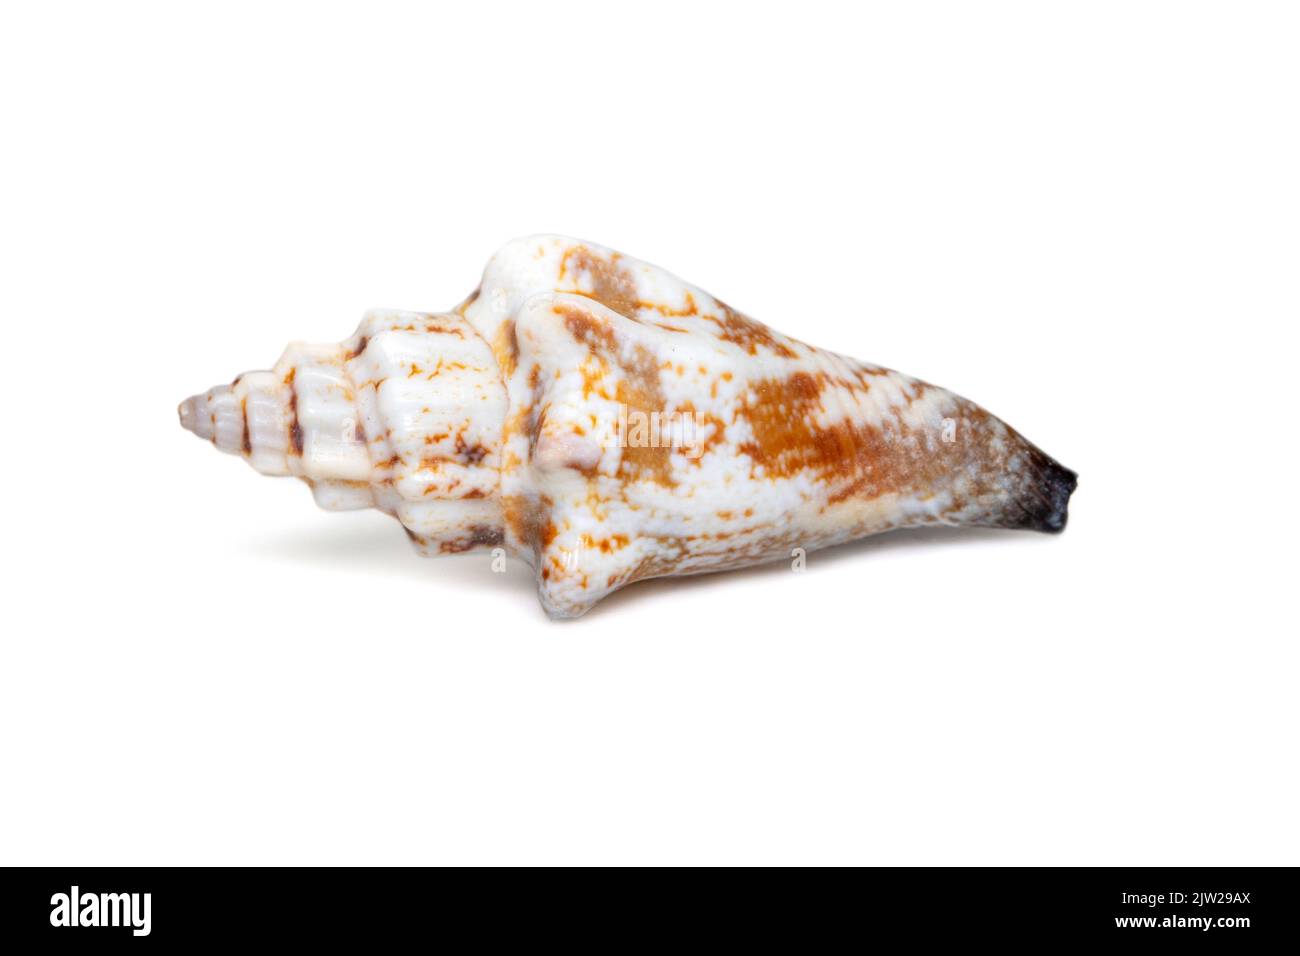 Image of canarium urceus is a species of sea snail, a marine gastropod mollusk in the family strombidae, the true conchs on a white background. Red Se Stock Photo